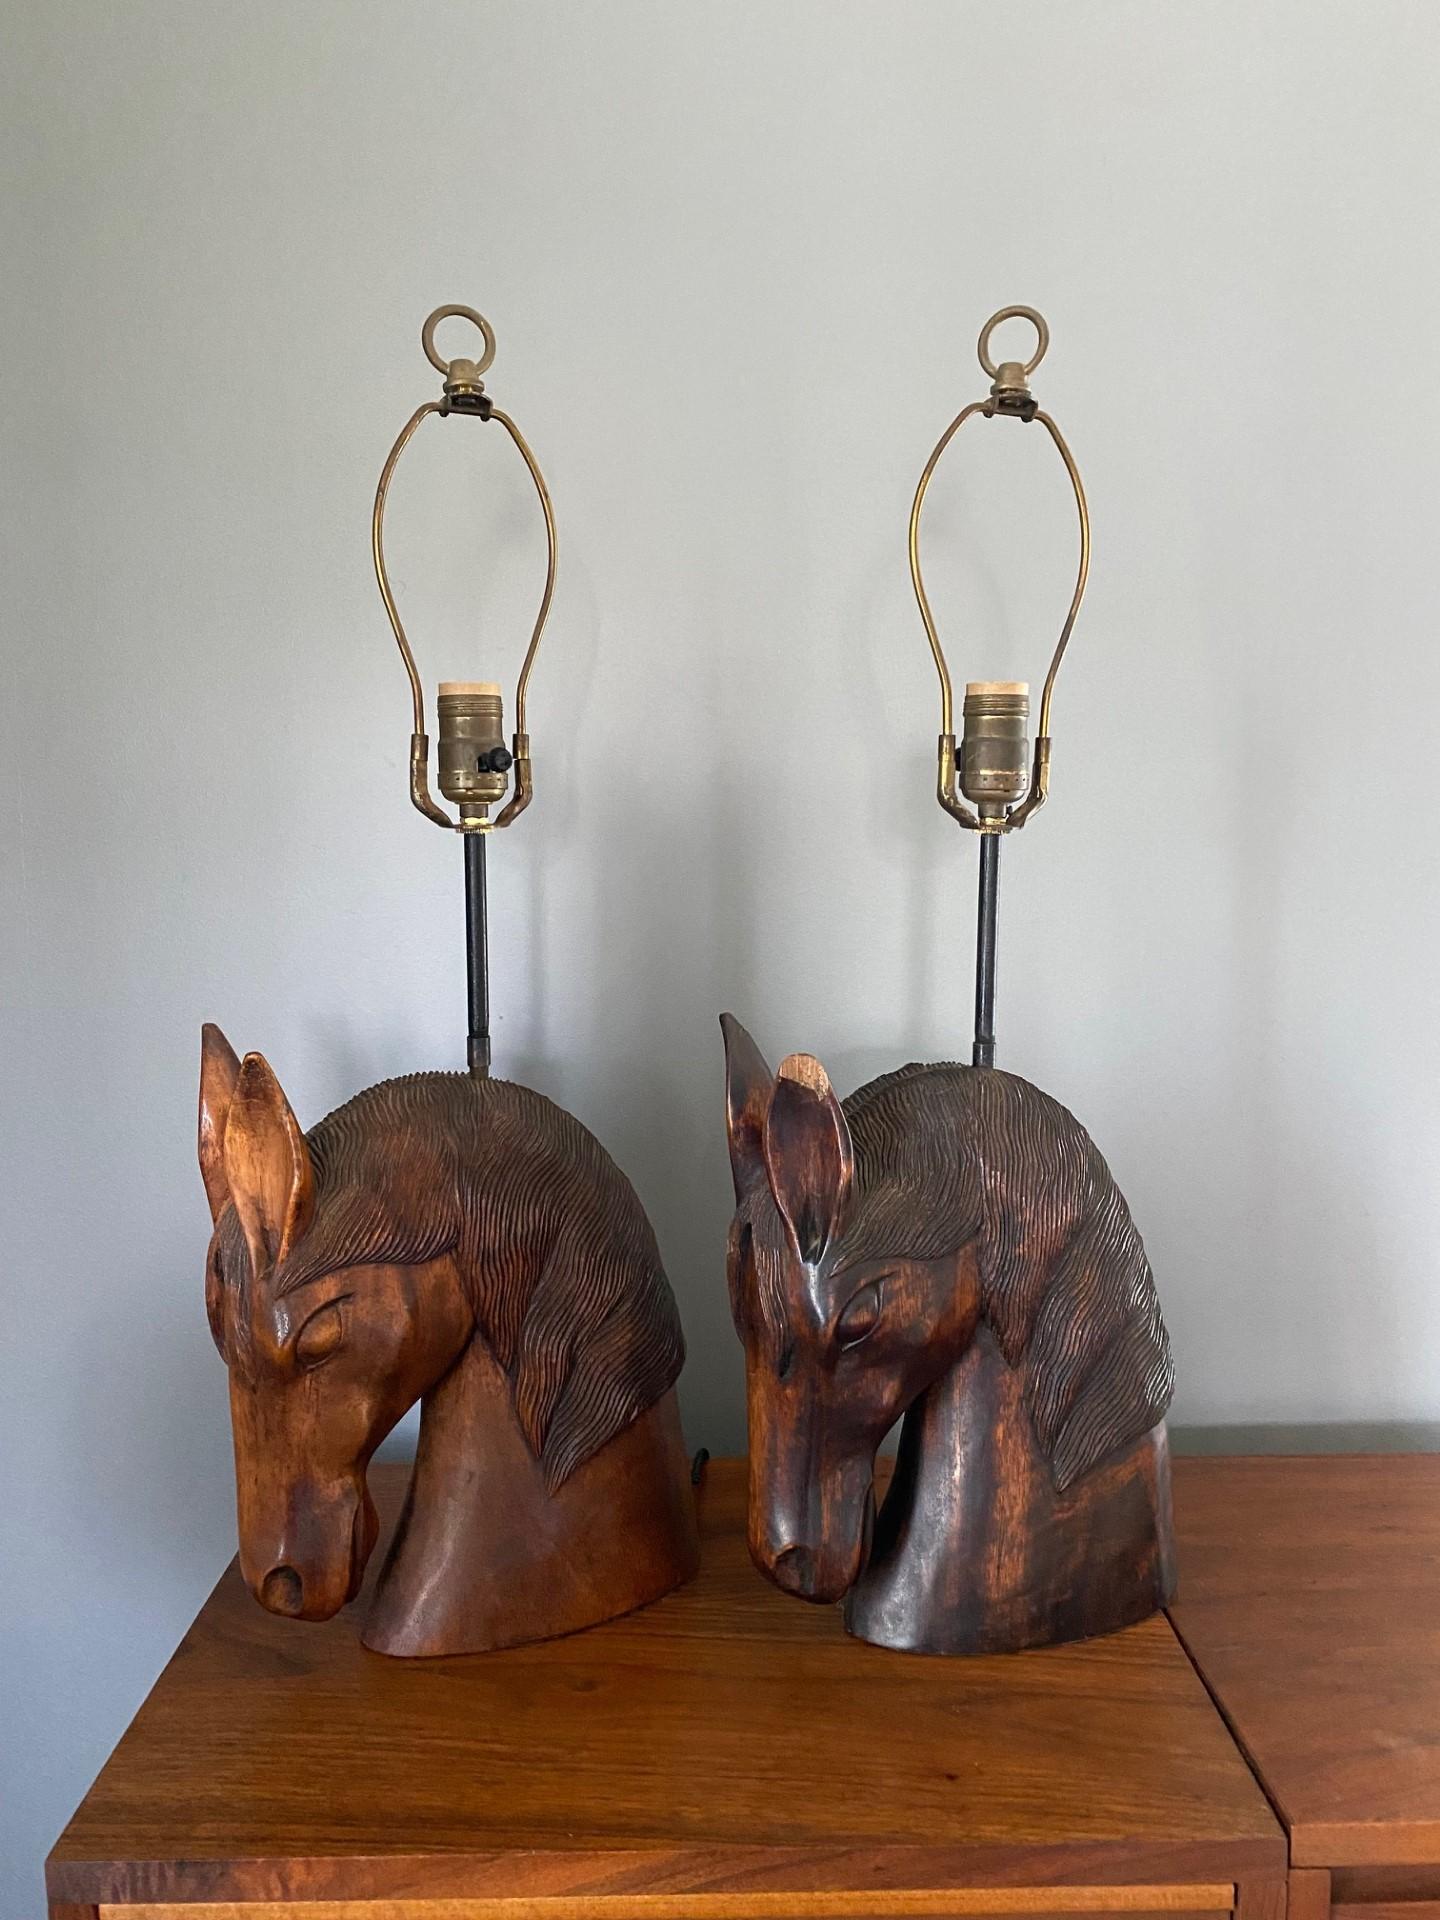 Pair of William Billy Haines carved horse head lamps. This is a unique and stunning pair for of lamps that can complement a variety of different styles. From midcentury to modern, to organic. The horse heads are beautifully carved and seamlessly